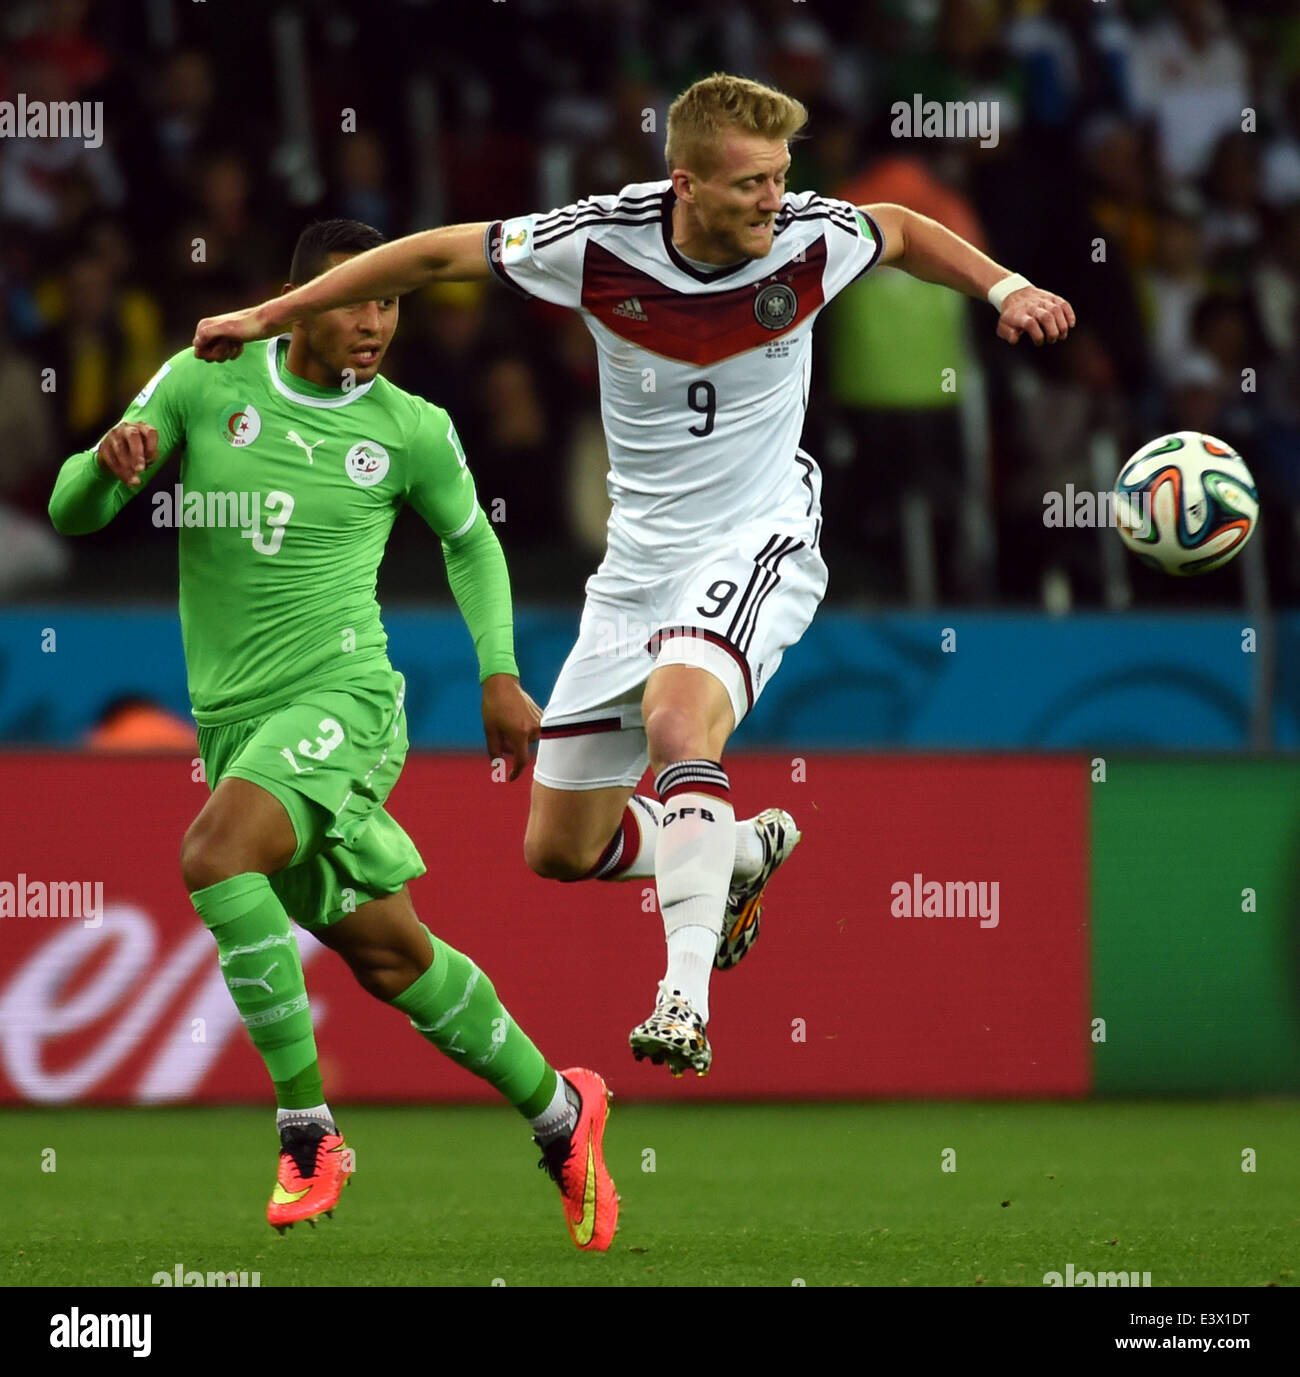 Porto Alegre, Brazil. 30th June, 2014. Germany's Andre Schurrle (R) vies with Algeria's Faouzi Ghoualm during a Round of 16 match between Germany and Algeria of 2014 FIFA World Cup at the Estadio Beira-Rio Stadium in Porto Alegre, Brazil, on June 30, 2014. Credit:  Li Ga/Xinhua/Alamy Live News Stock Photo